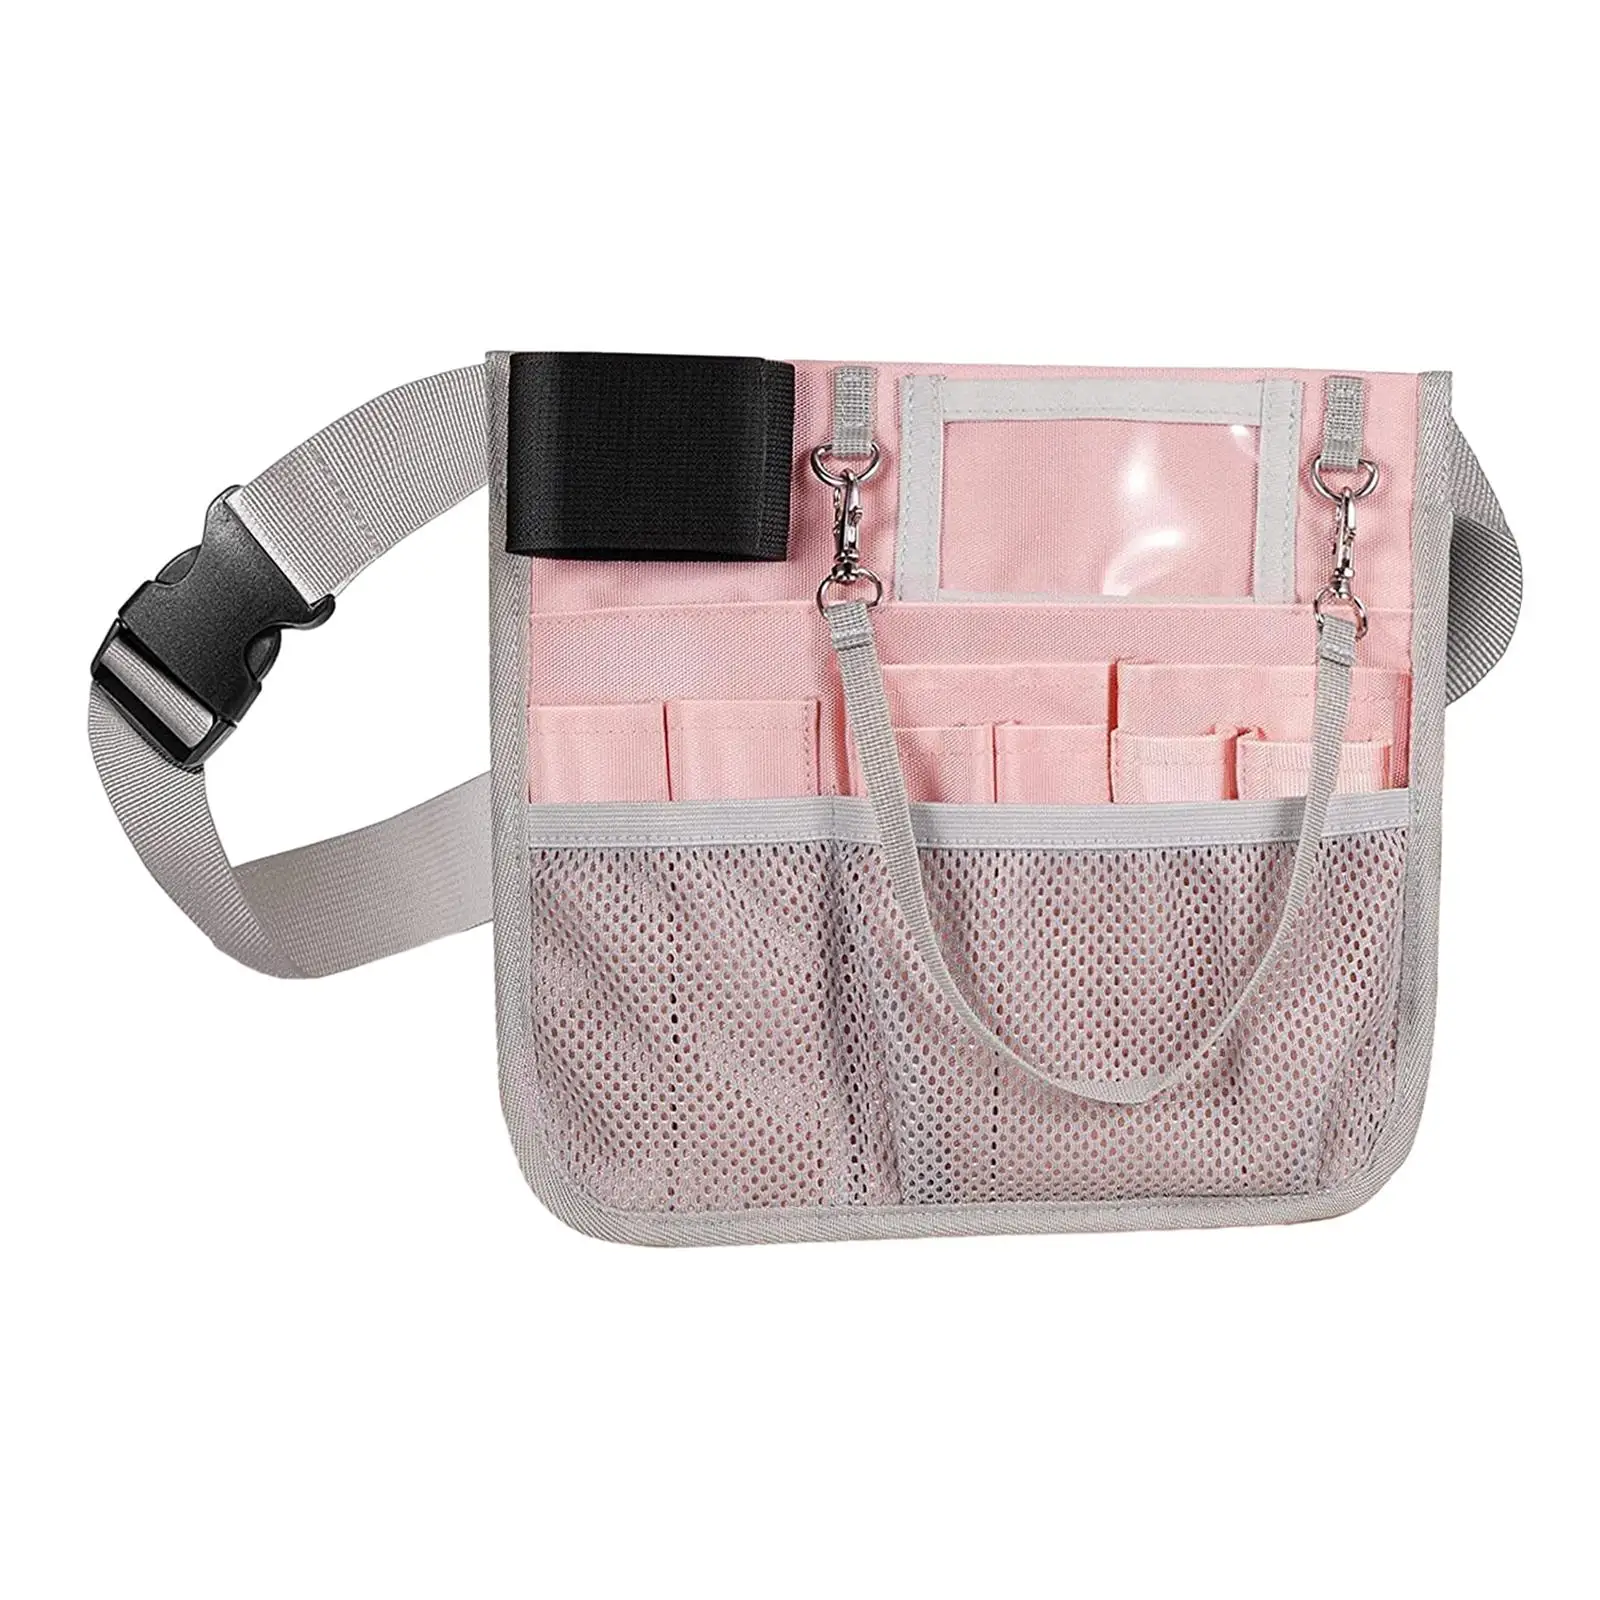  Fanny Pack Multi Compartments Waist Organizer Tool Bag for Practitioners & Professionals